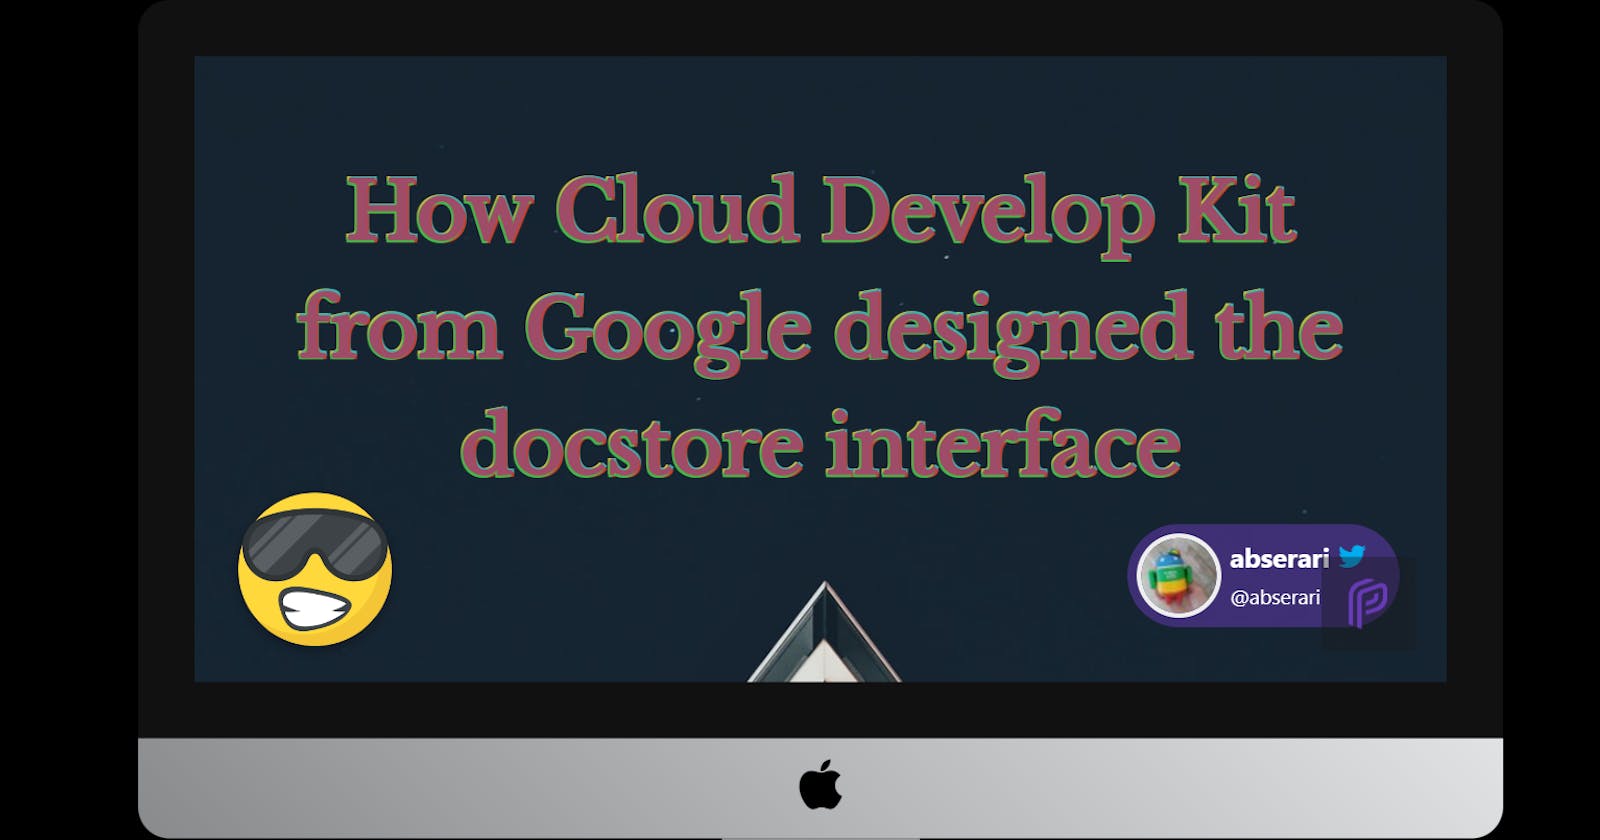 How Cloud Develop Kit from Google designed the docstore interface